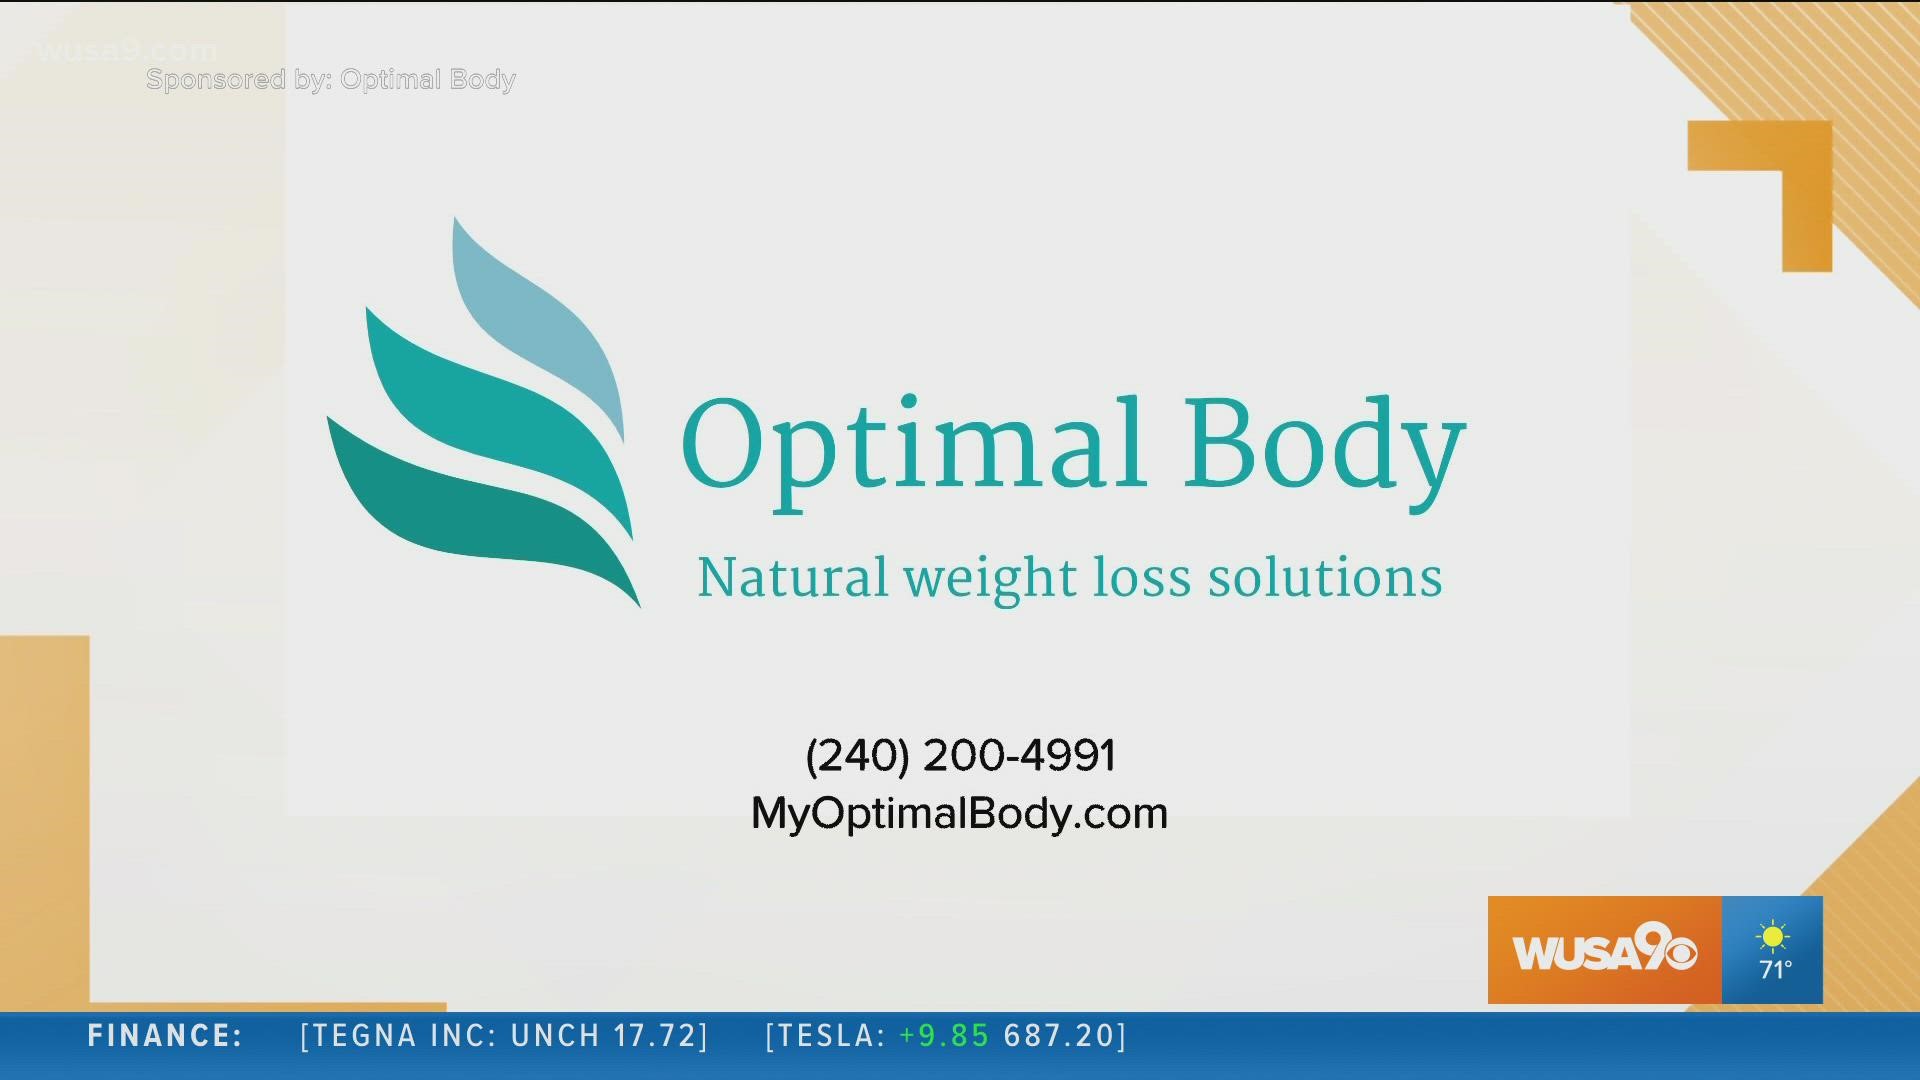 Sponsored by Optimal Body. Visit MyOptimalBody.com or call 240-200-4991 to start your weight loss journey.